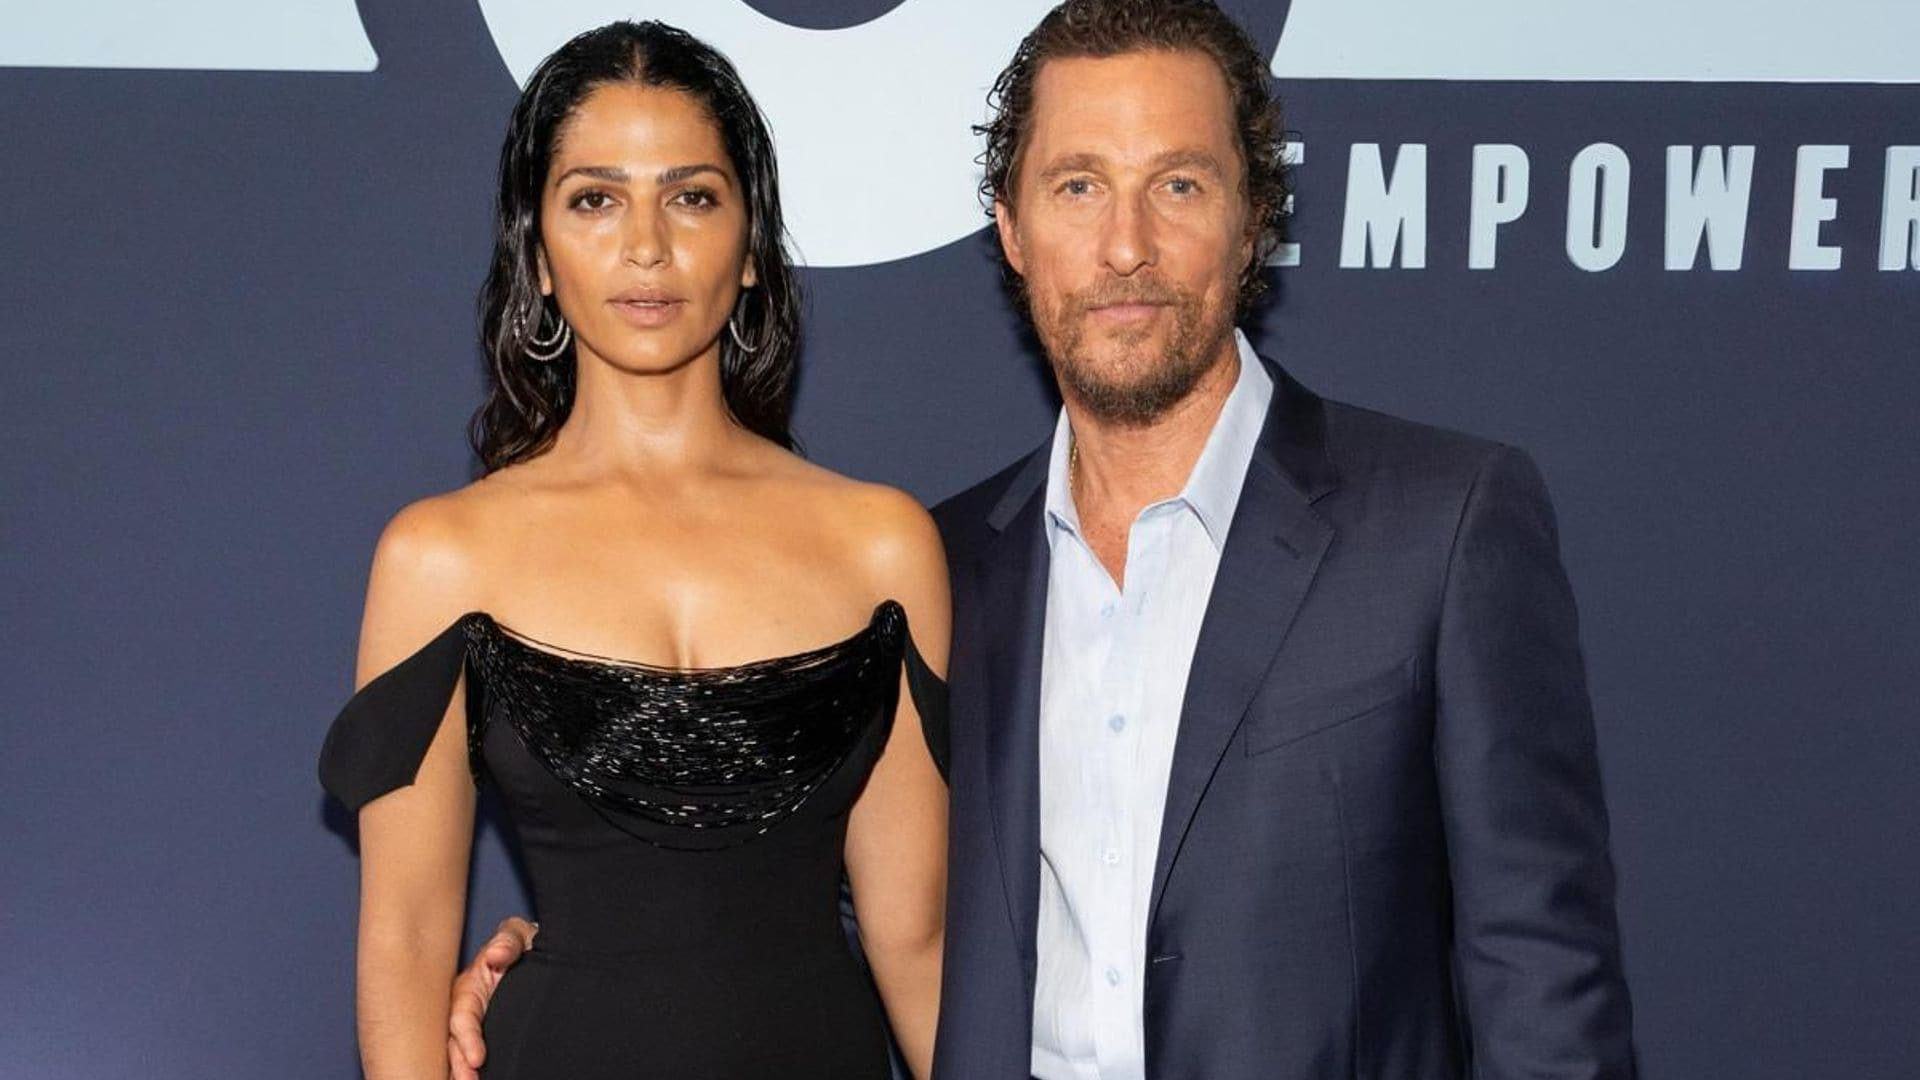 Matthew McConaughey celebrates 12 years of marriage with Camila Alves with sweet gesture